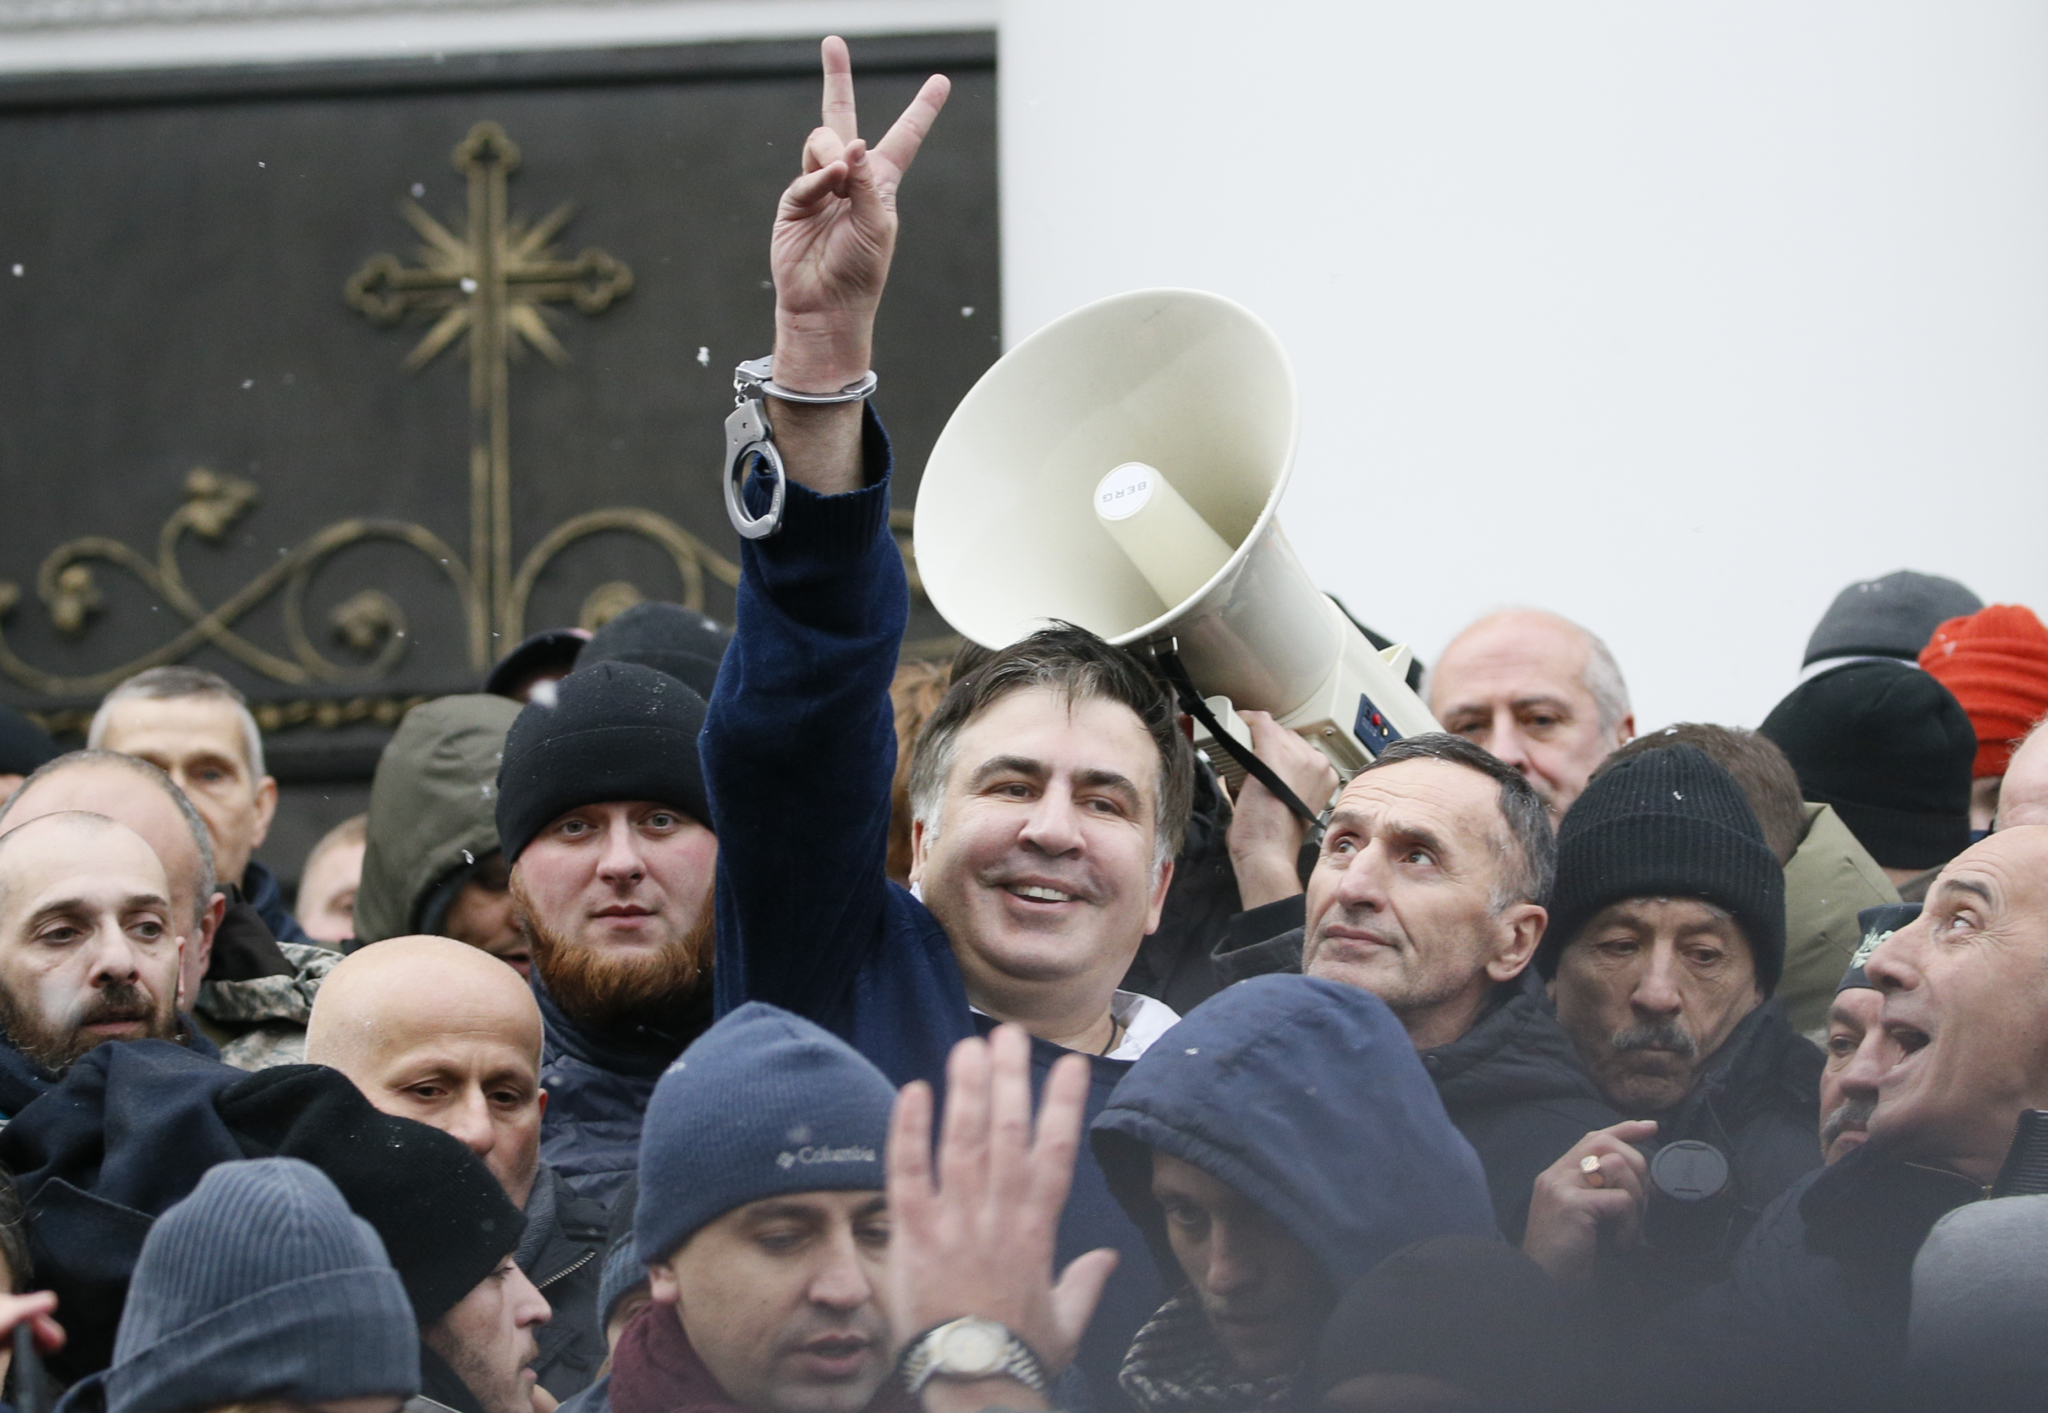 Mikhail Saakashvili, who was the third president of Georgia and leader of the Ukrainian 'Movement of New Forces' opposition party, was arrested Tuesday morning